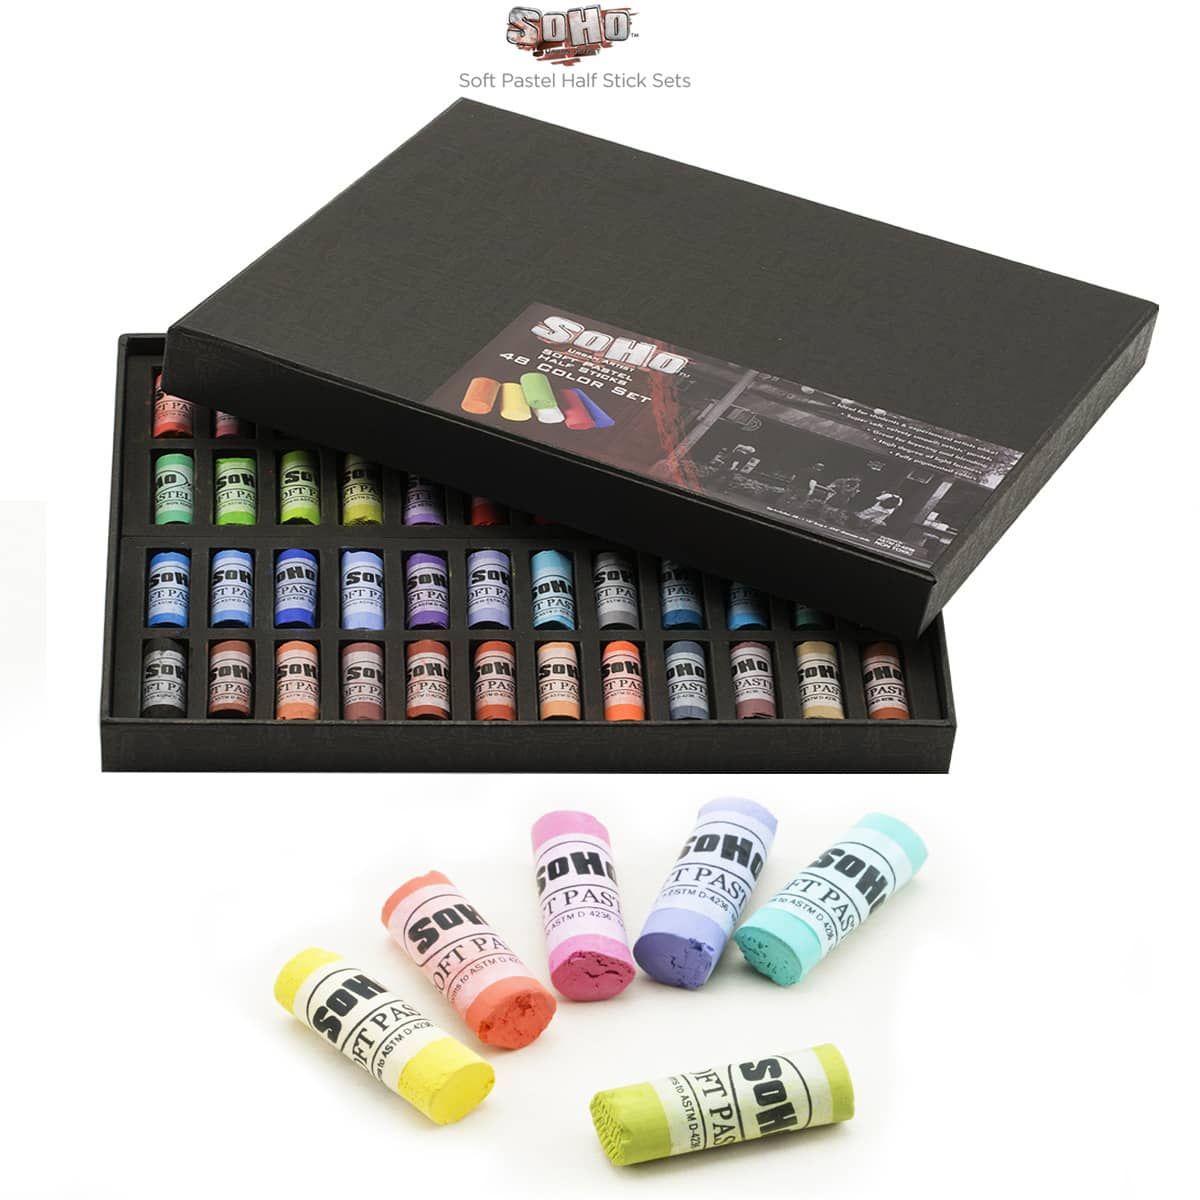 NEW Soft Pastels -Mungyo Gallery- Artists' Set of 12 Assorted -Cardboard  Box